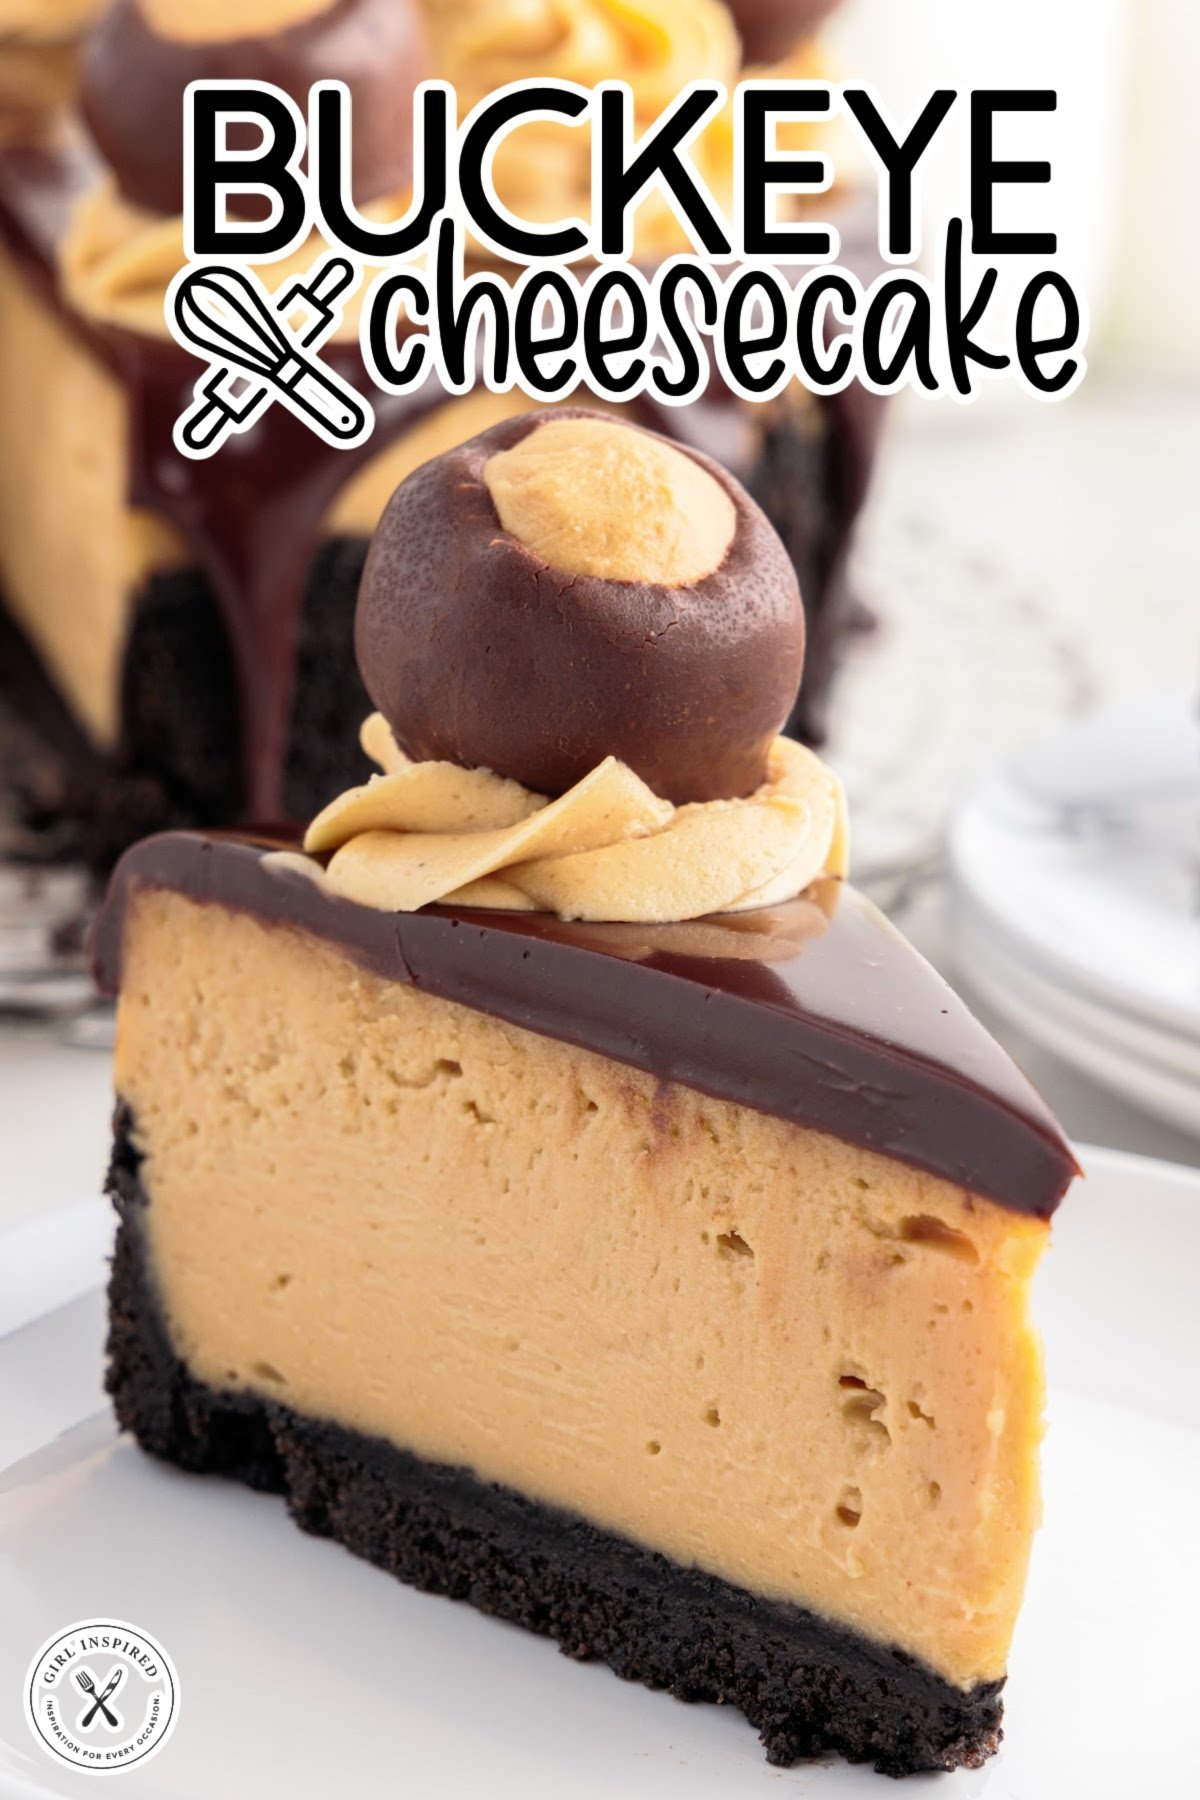 A slice of Chocolate Peanut Butter Cheesecake on a plate with text overlay.